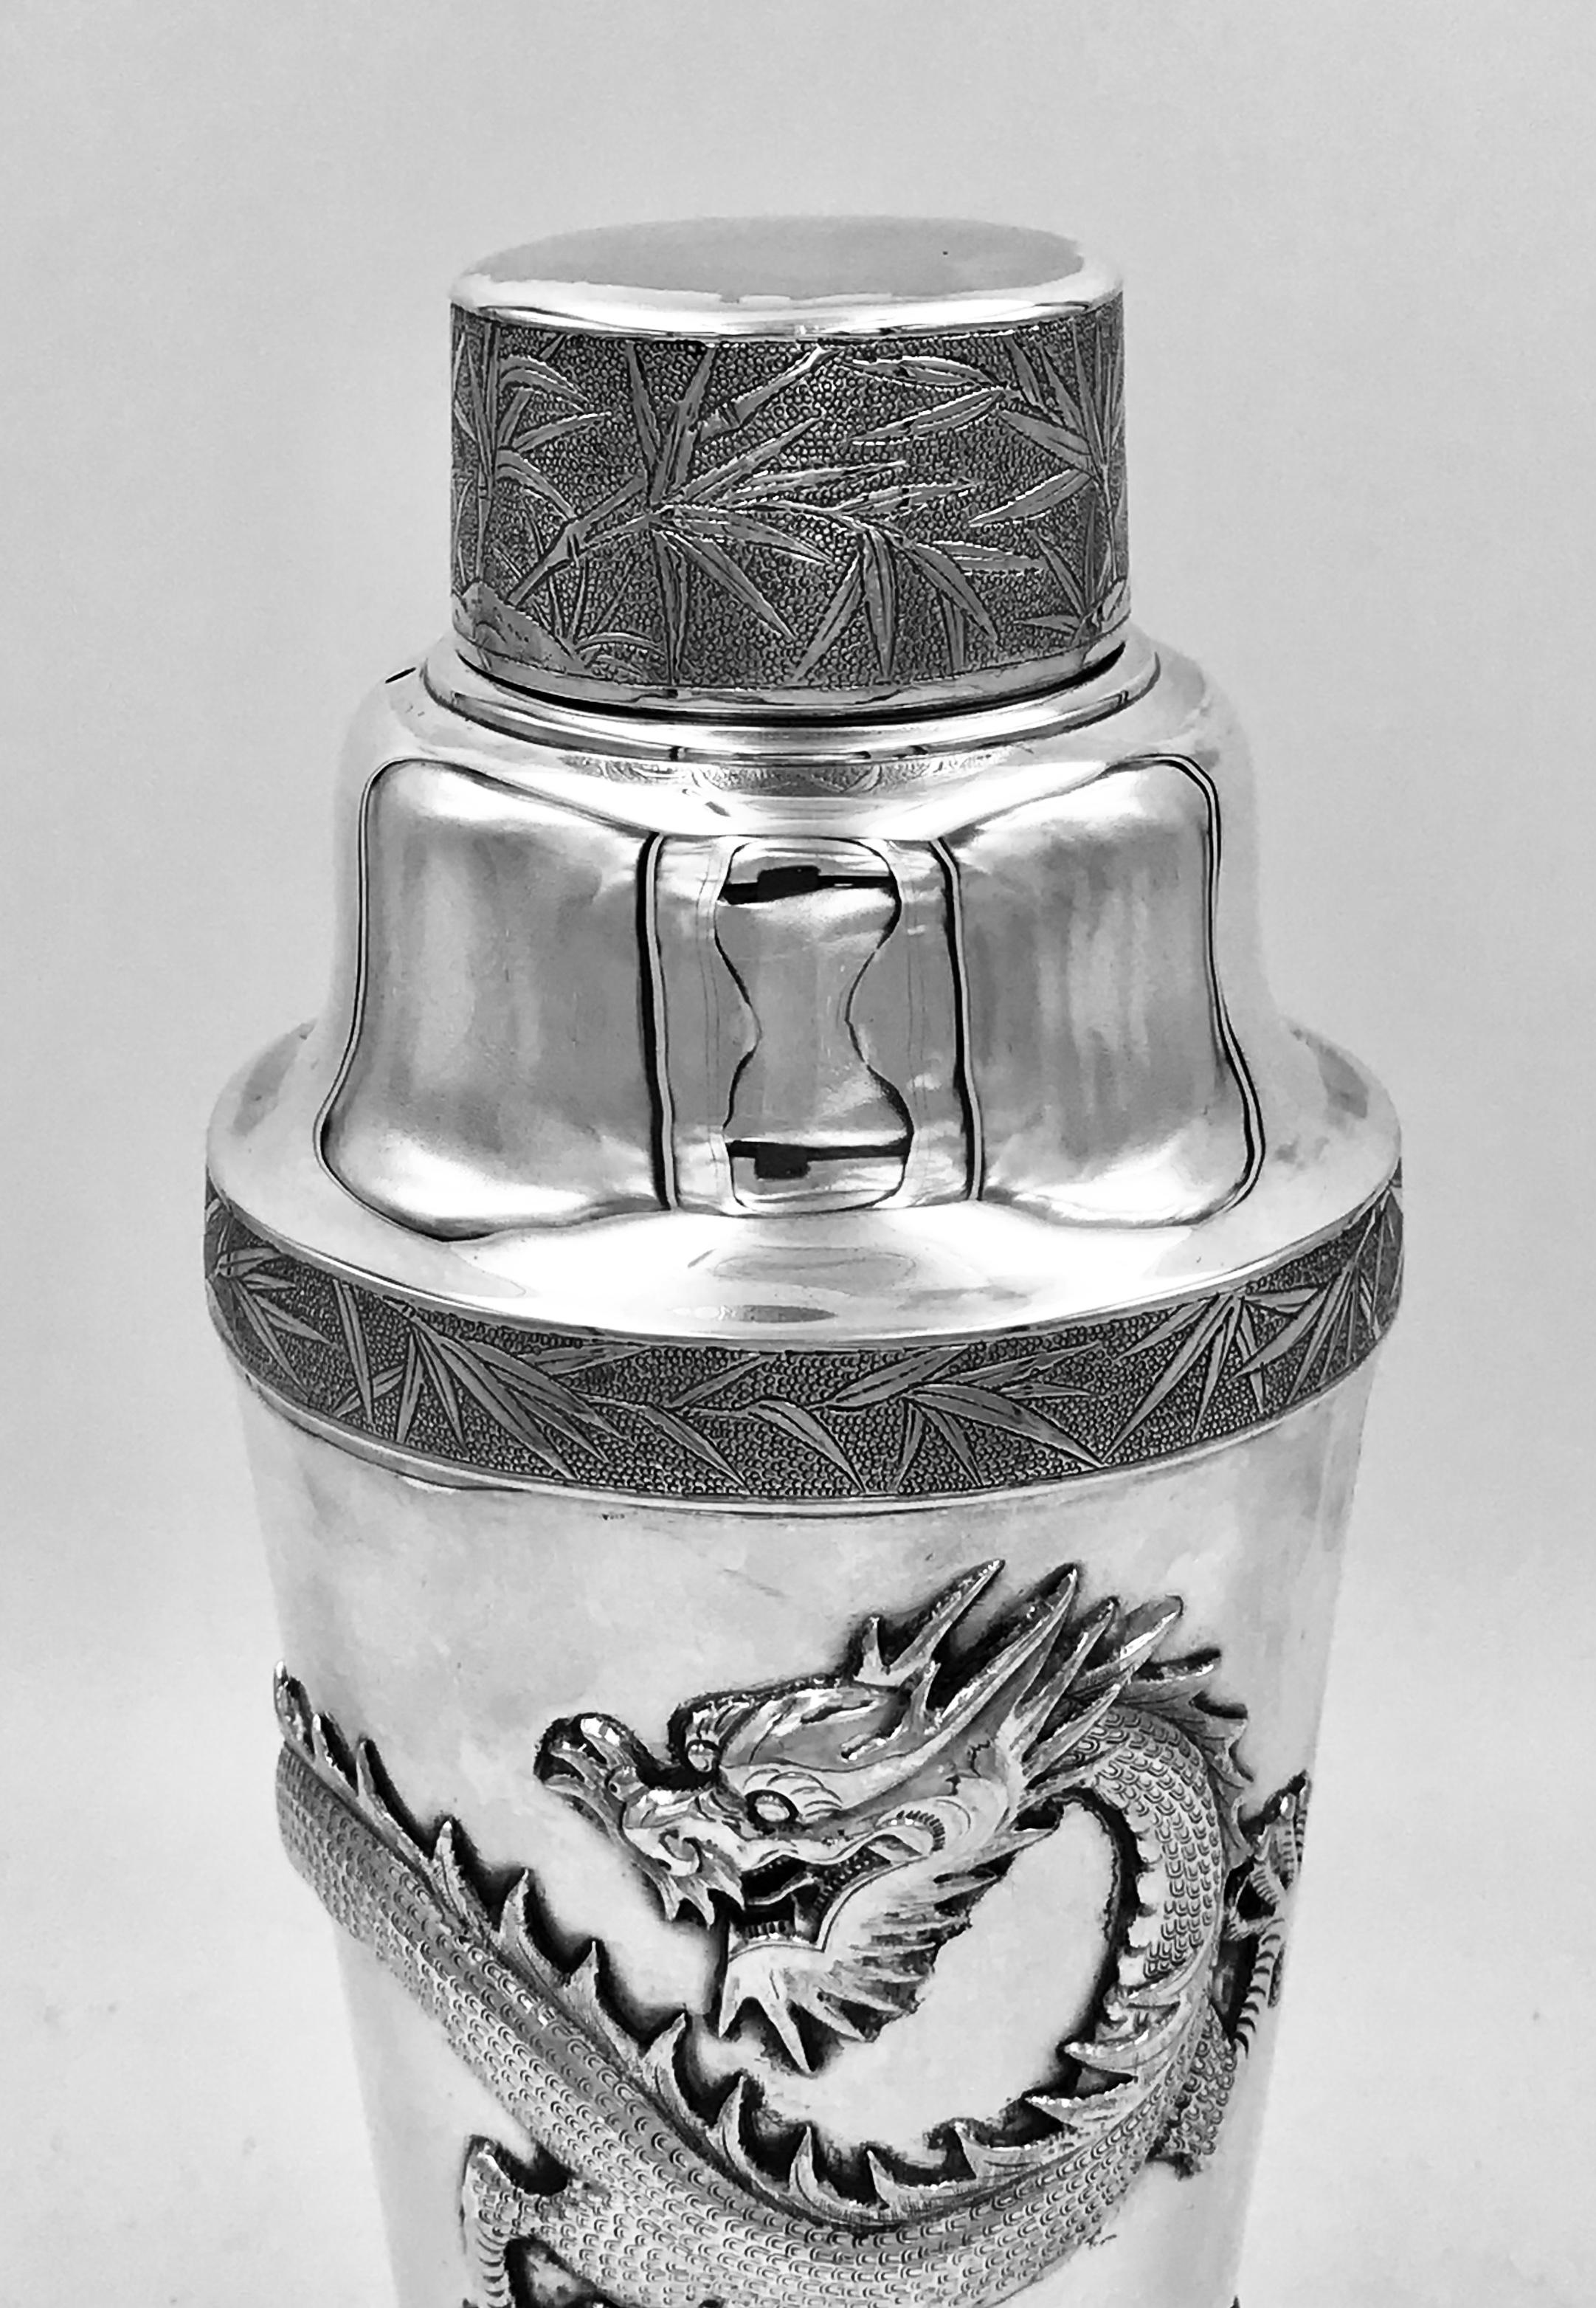 Chinese Export Silver Cocktail Shaker (Chinesisch)